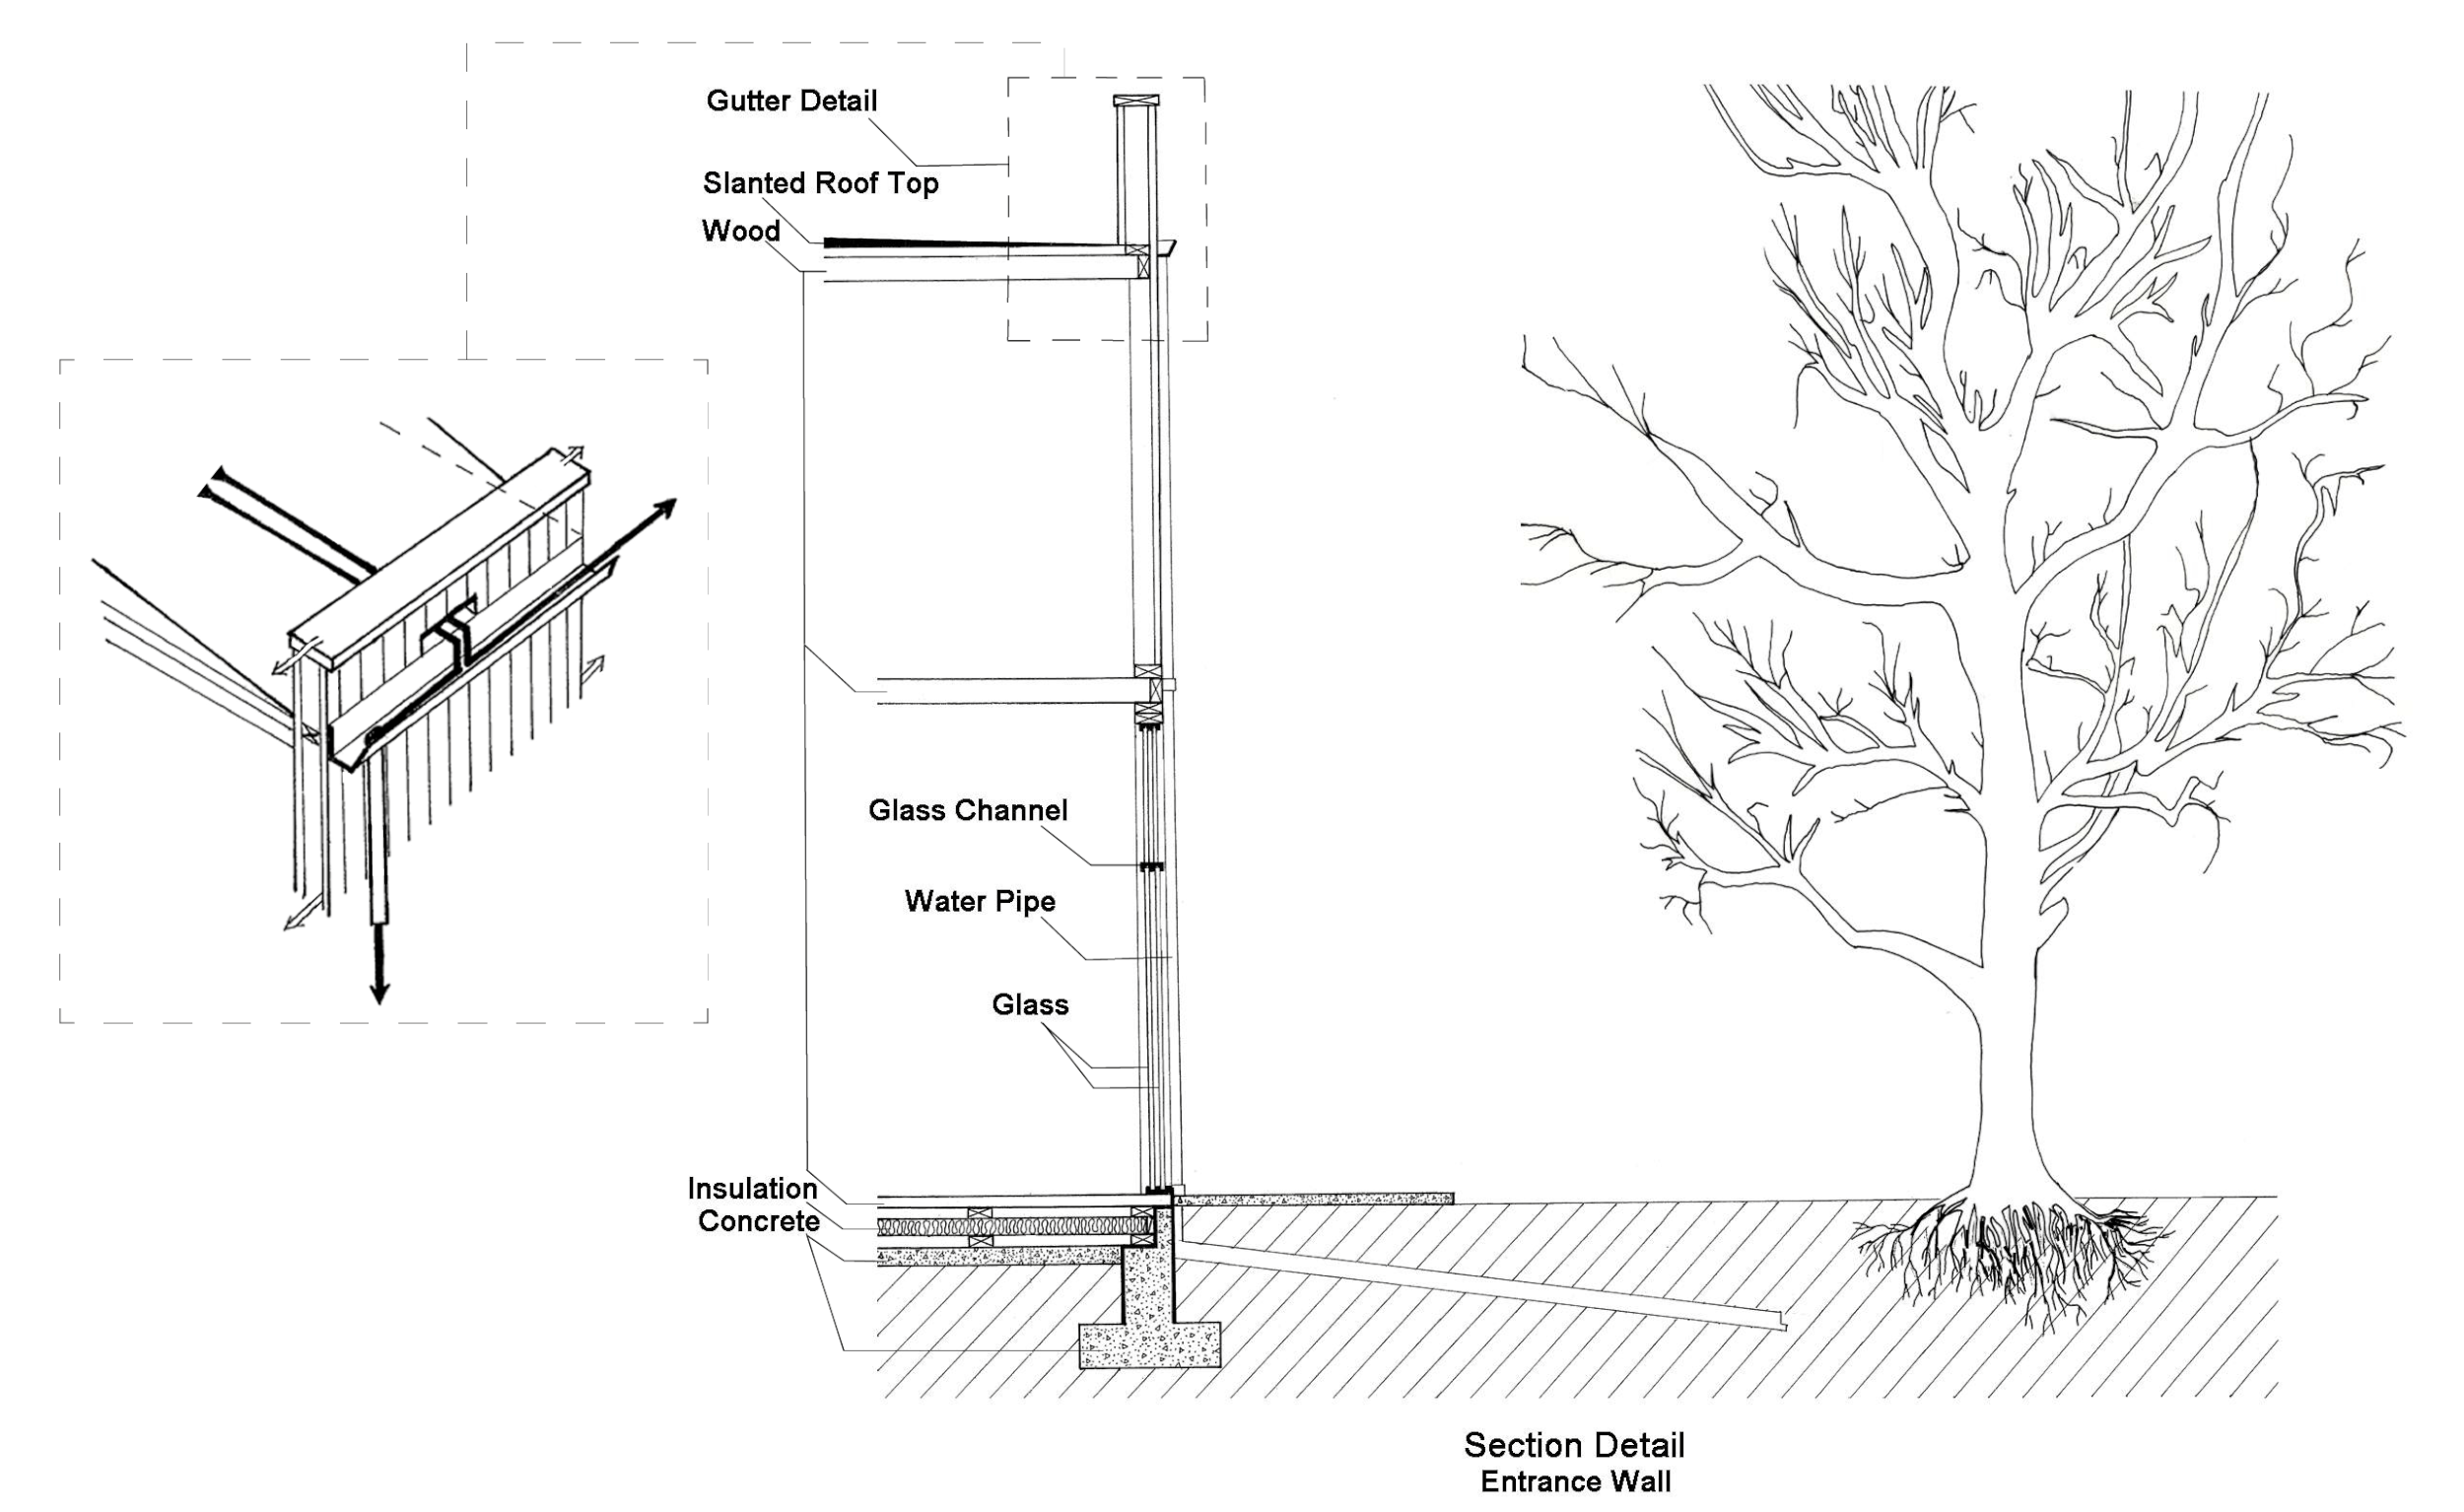 wall-detail-at-entrance-with-tree.gif